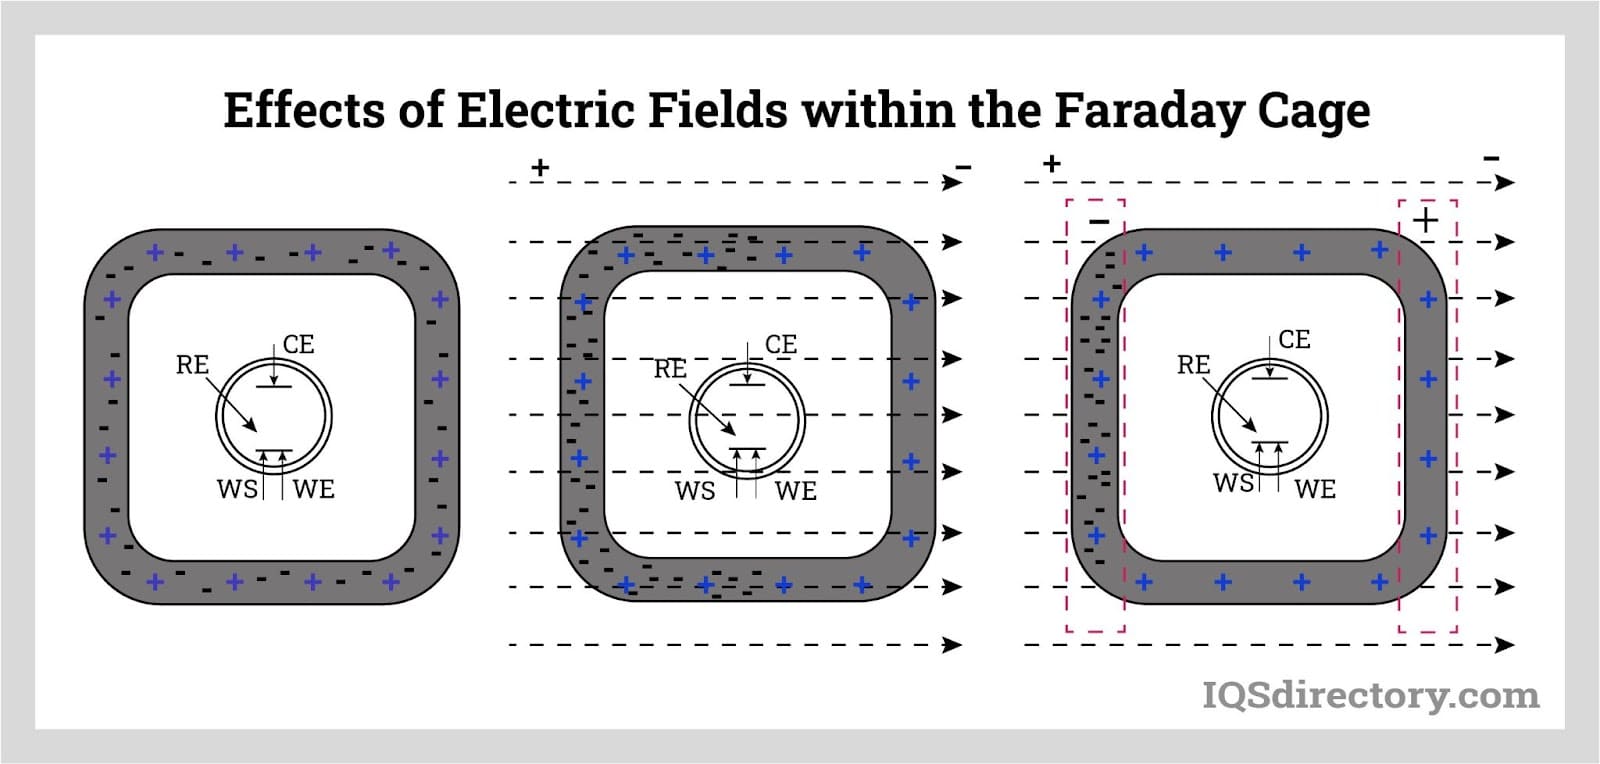 Effects of Electric Fields within the Faraday Cage